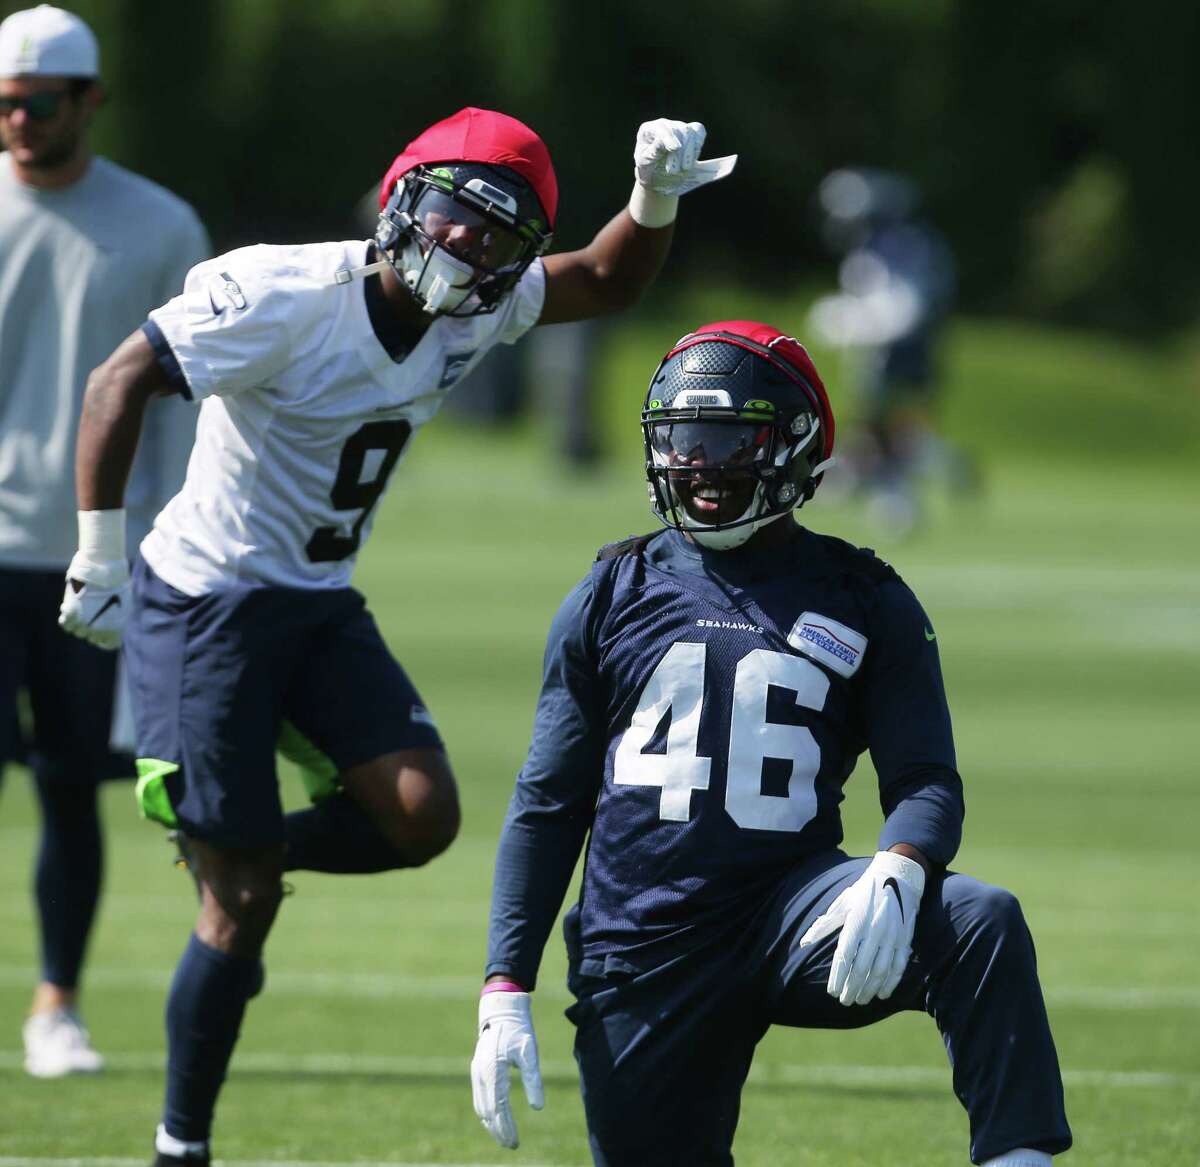 SeattlePI: After rookie minicamp with the Seahawks in the spring, did any team pick you up?  Johnson: "No. I was just working out, having faith ... (The Seahawks) called me back and I was happy. It's been a blessing. I wasn't with no other team."